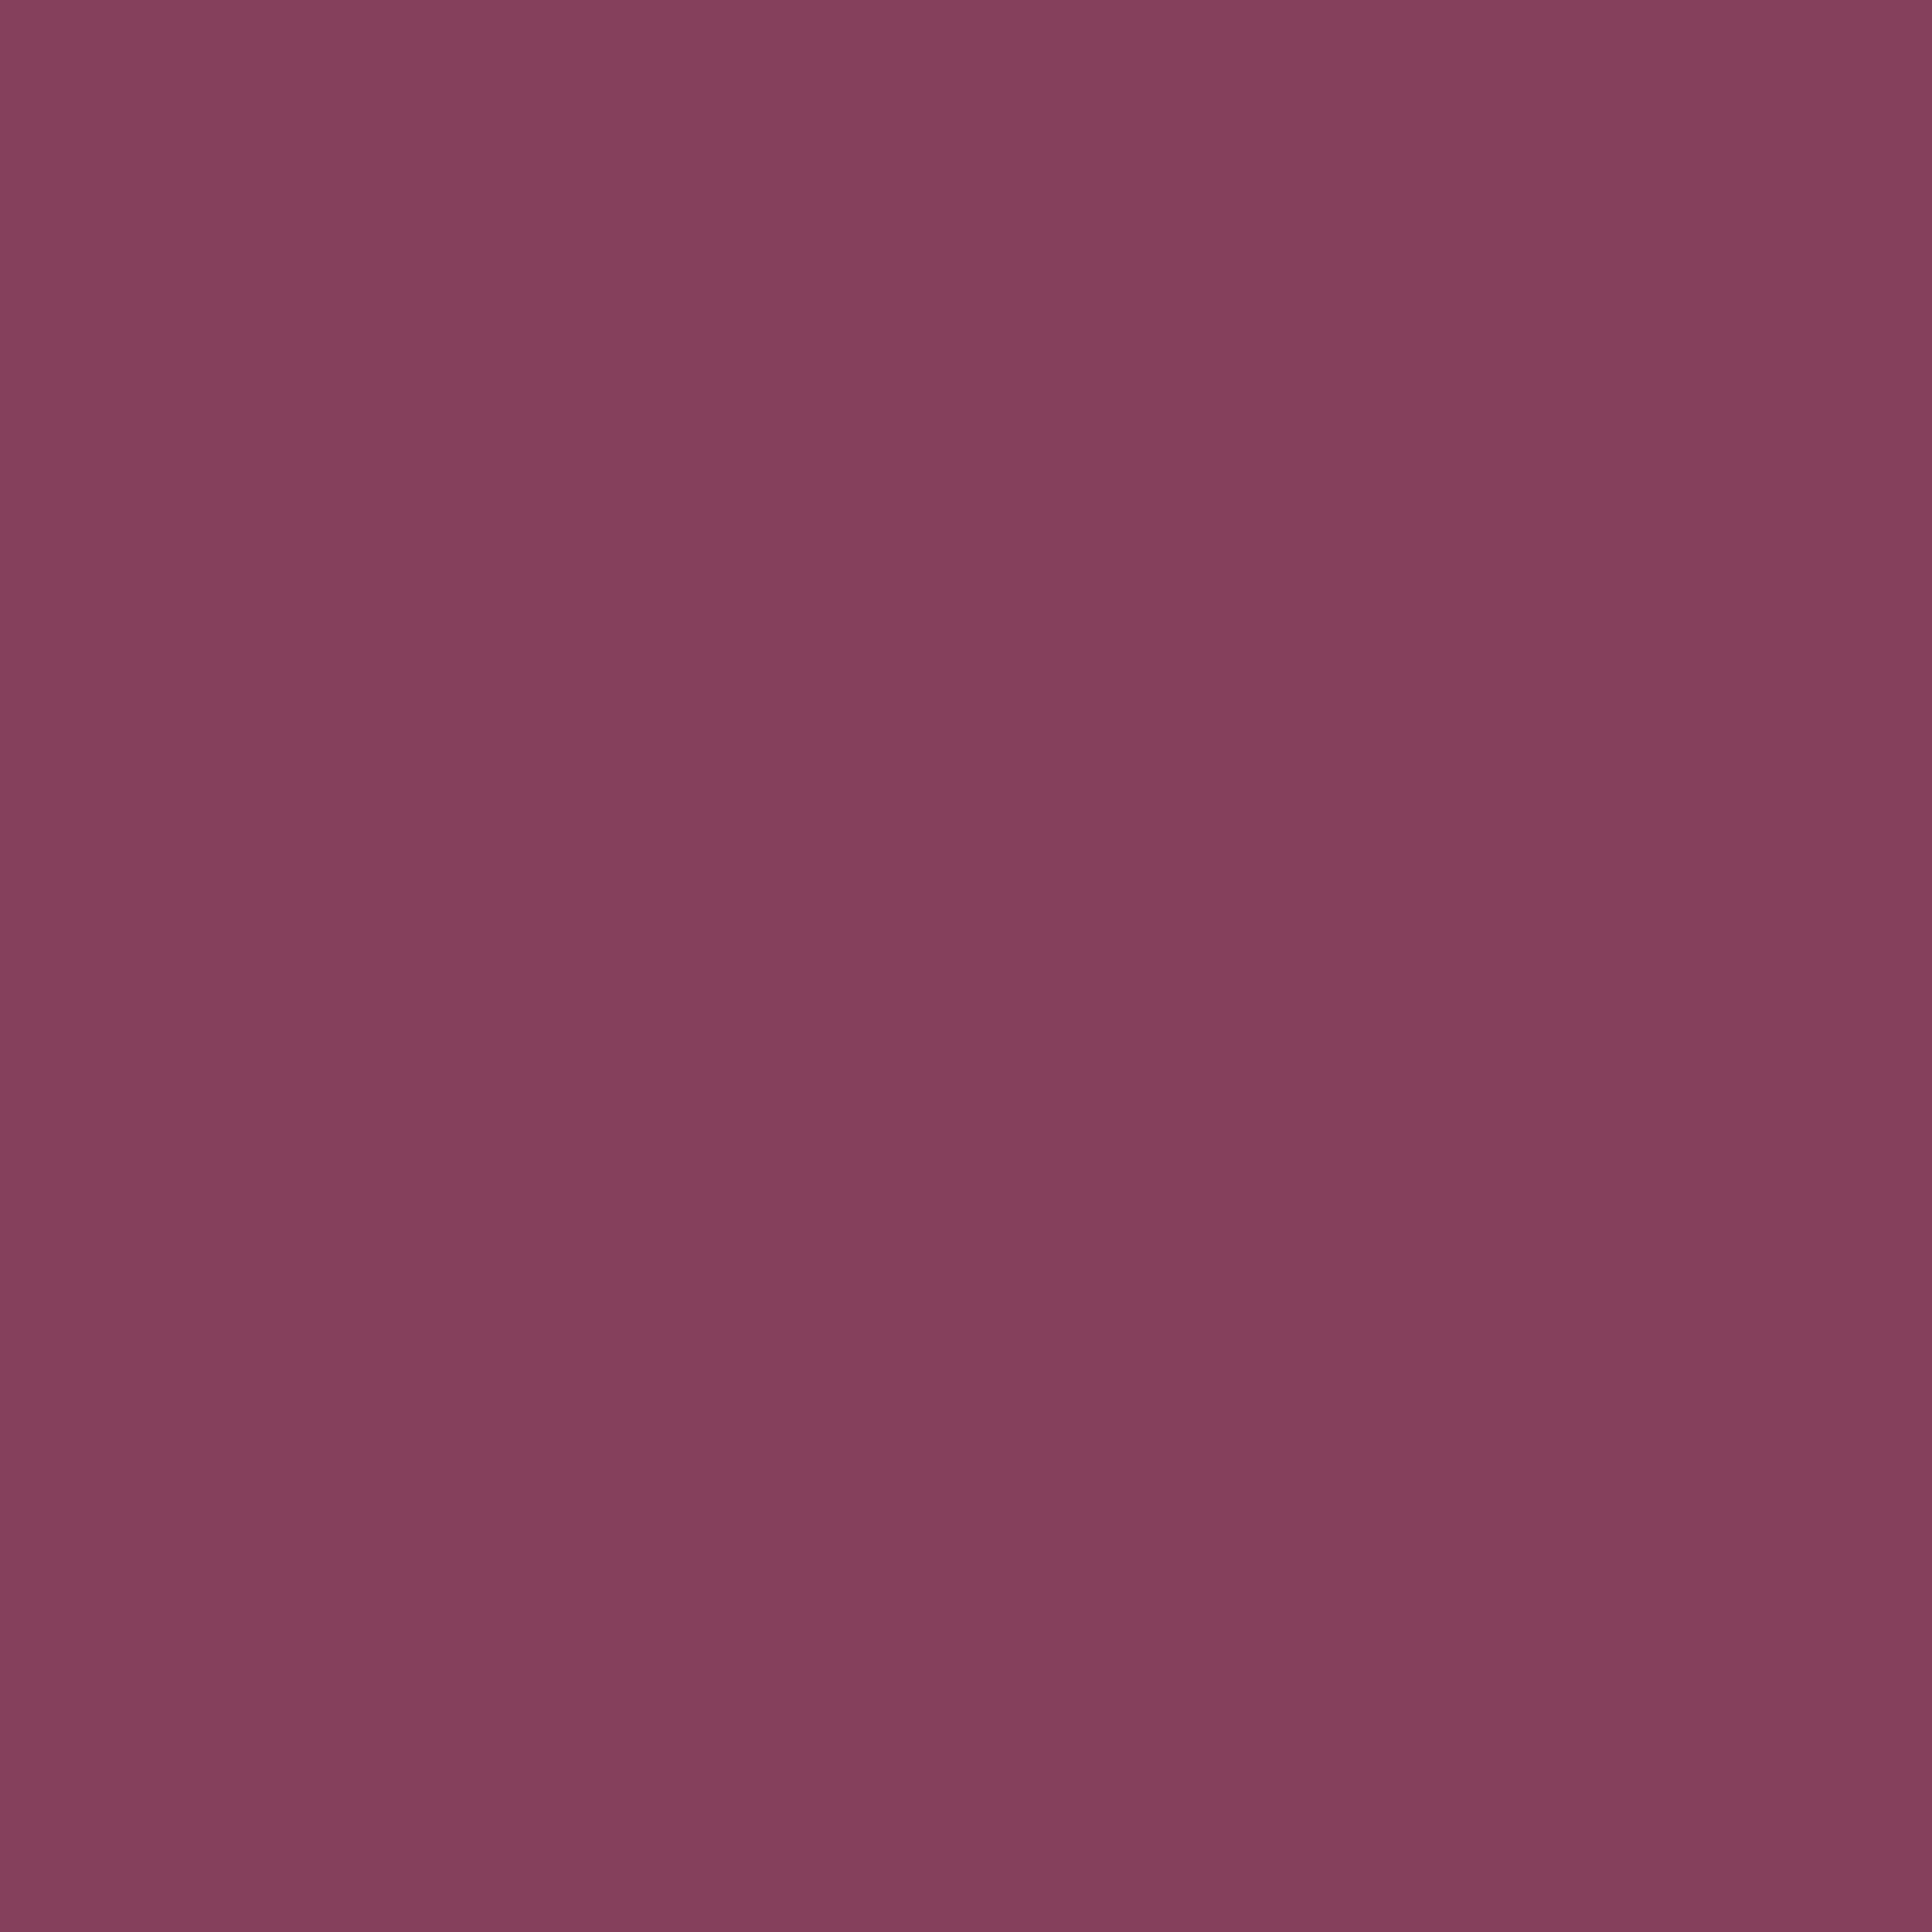 2048x2048 Deep Ruby Solid Color Background